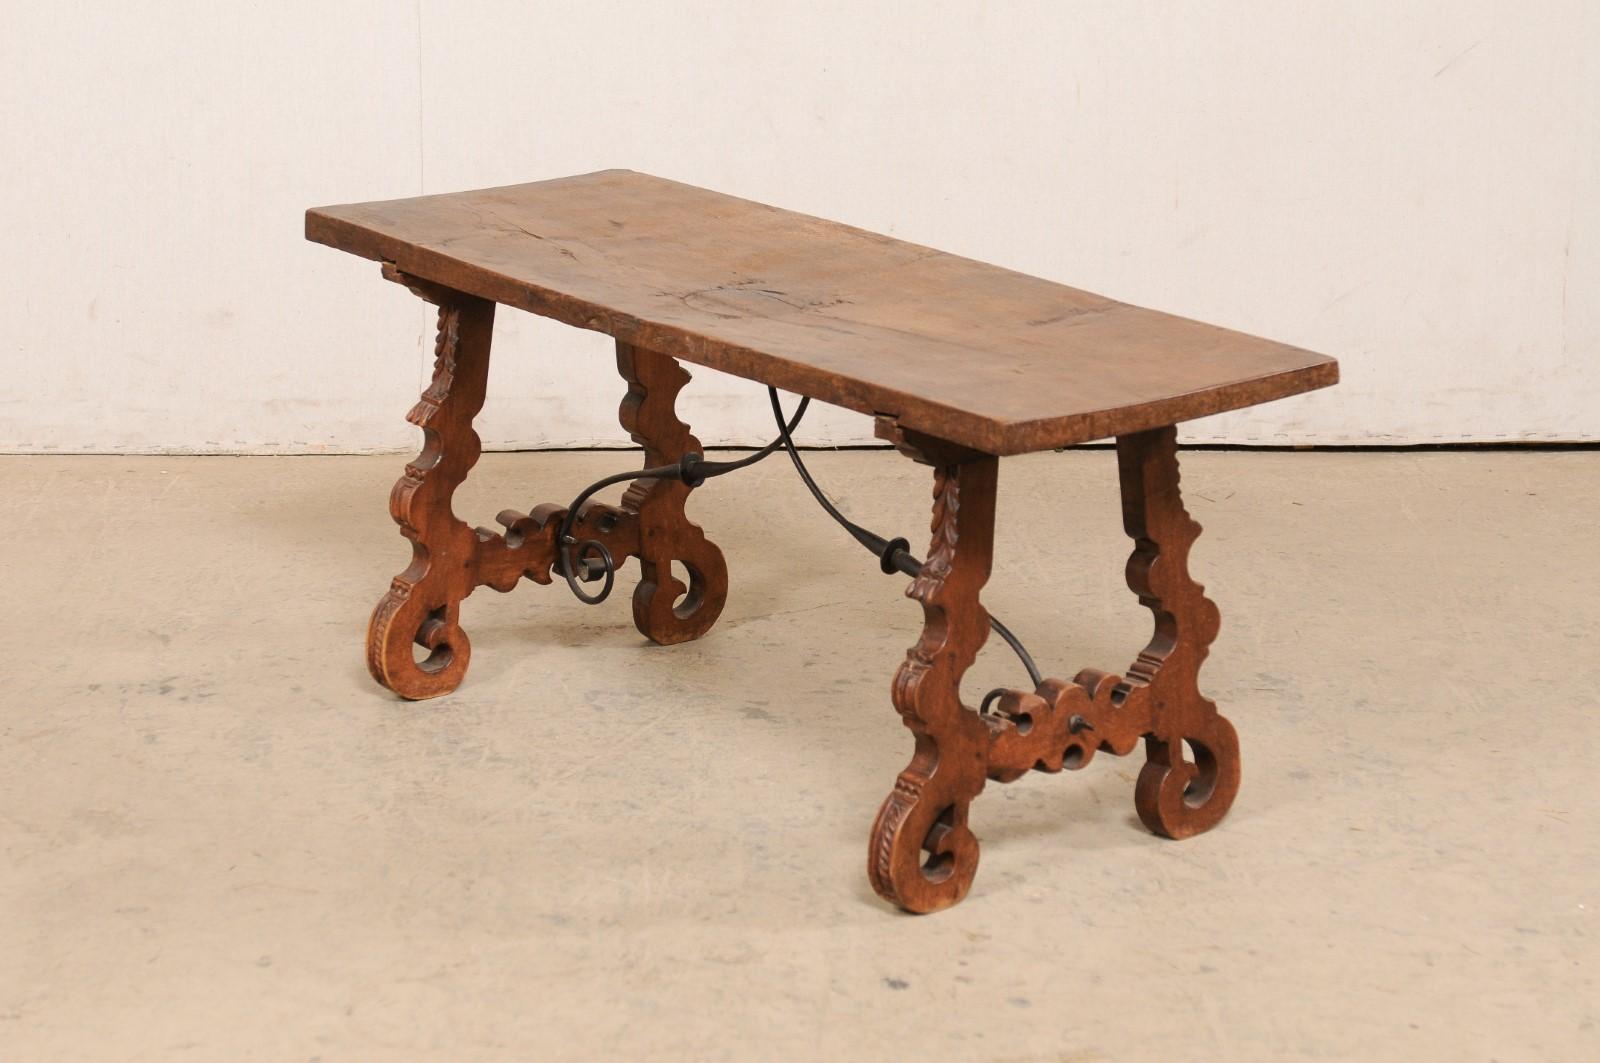 Spanish Antique Wooden Coffee Table w/ Carved Lyre-Legs and Nice Iron Stretchers For Sale 1